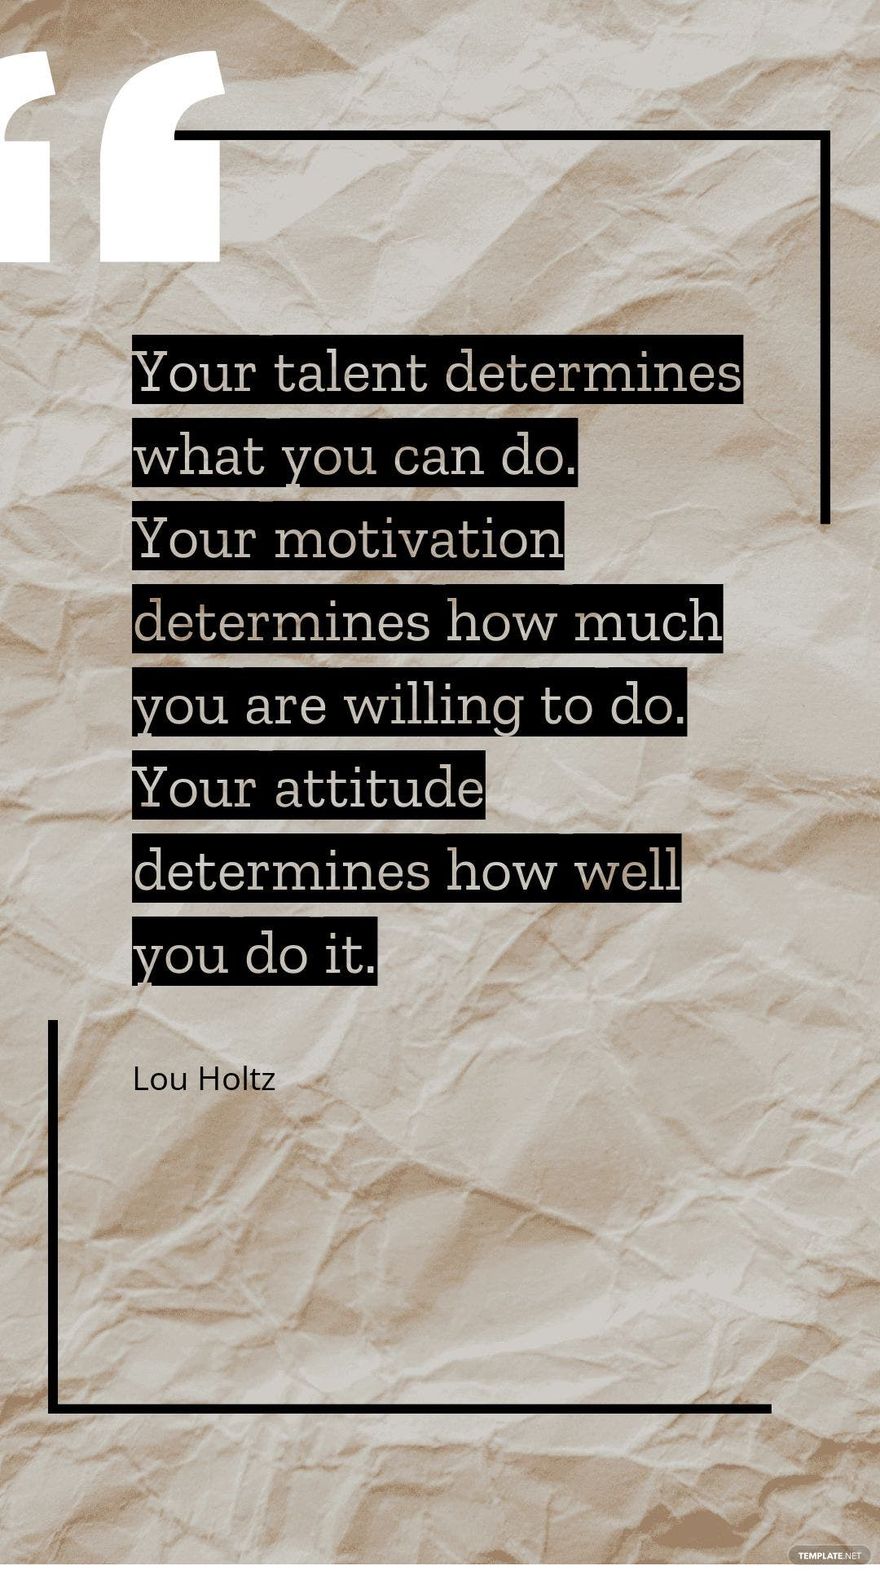 Lou Holtz - Your talent determines what you can do. Your motivation determines how much you are willing to do. Your attitude determines how well you do it.